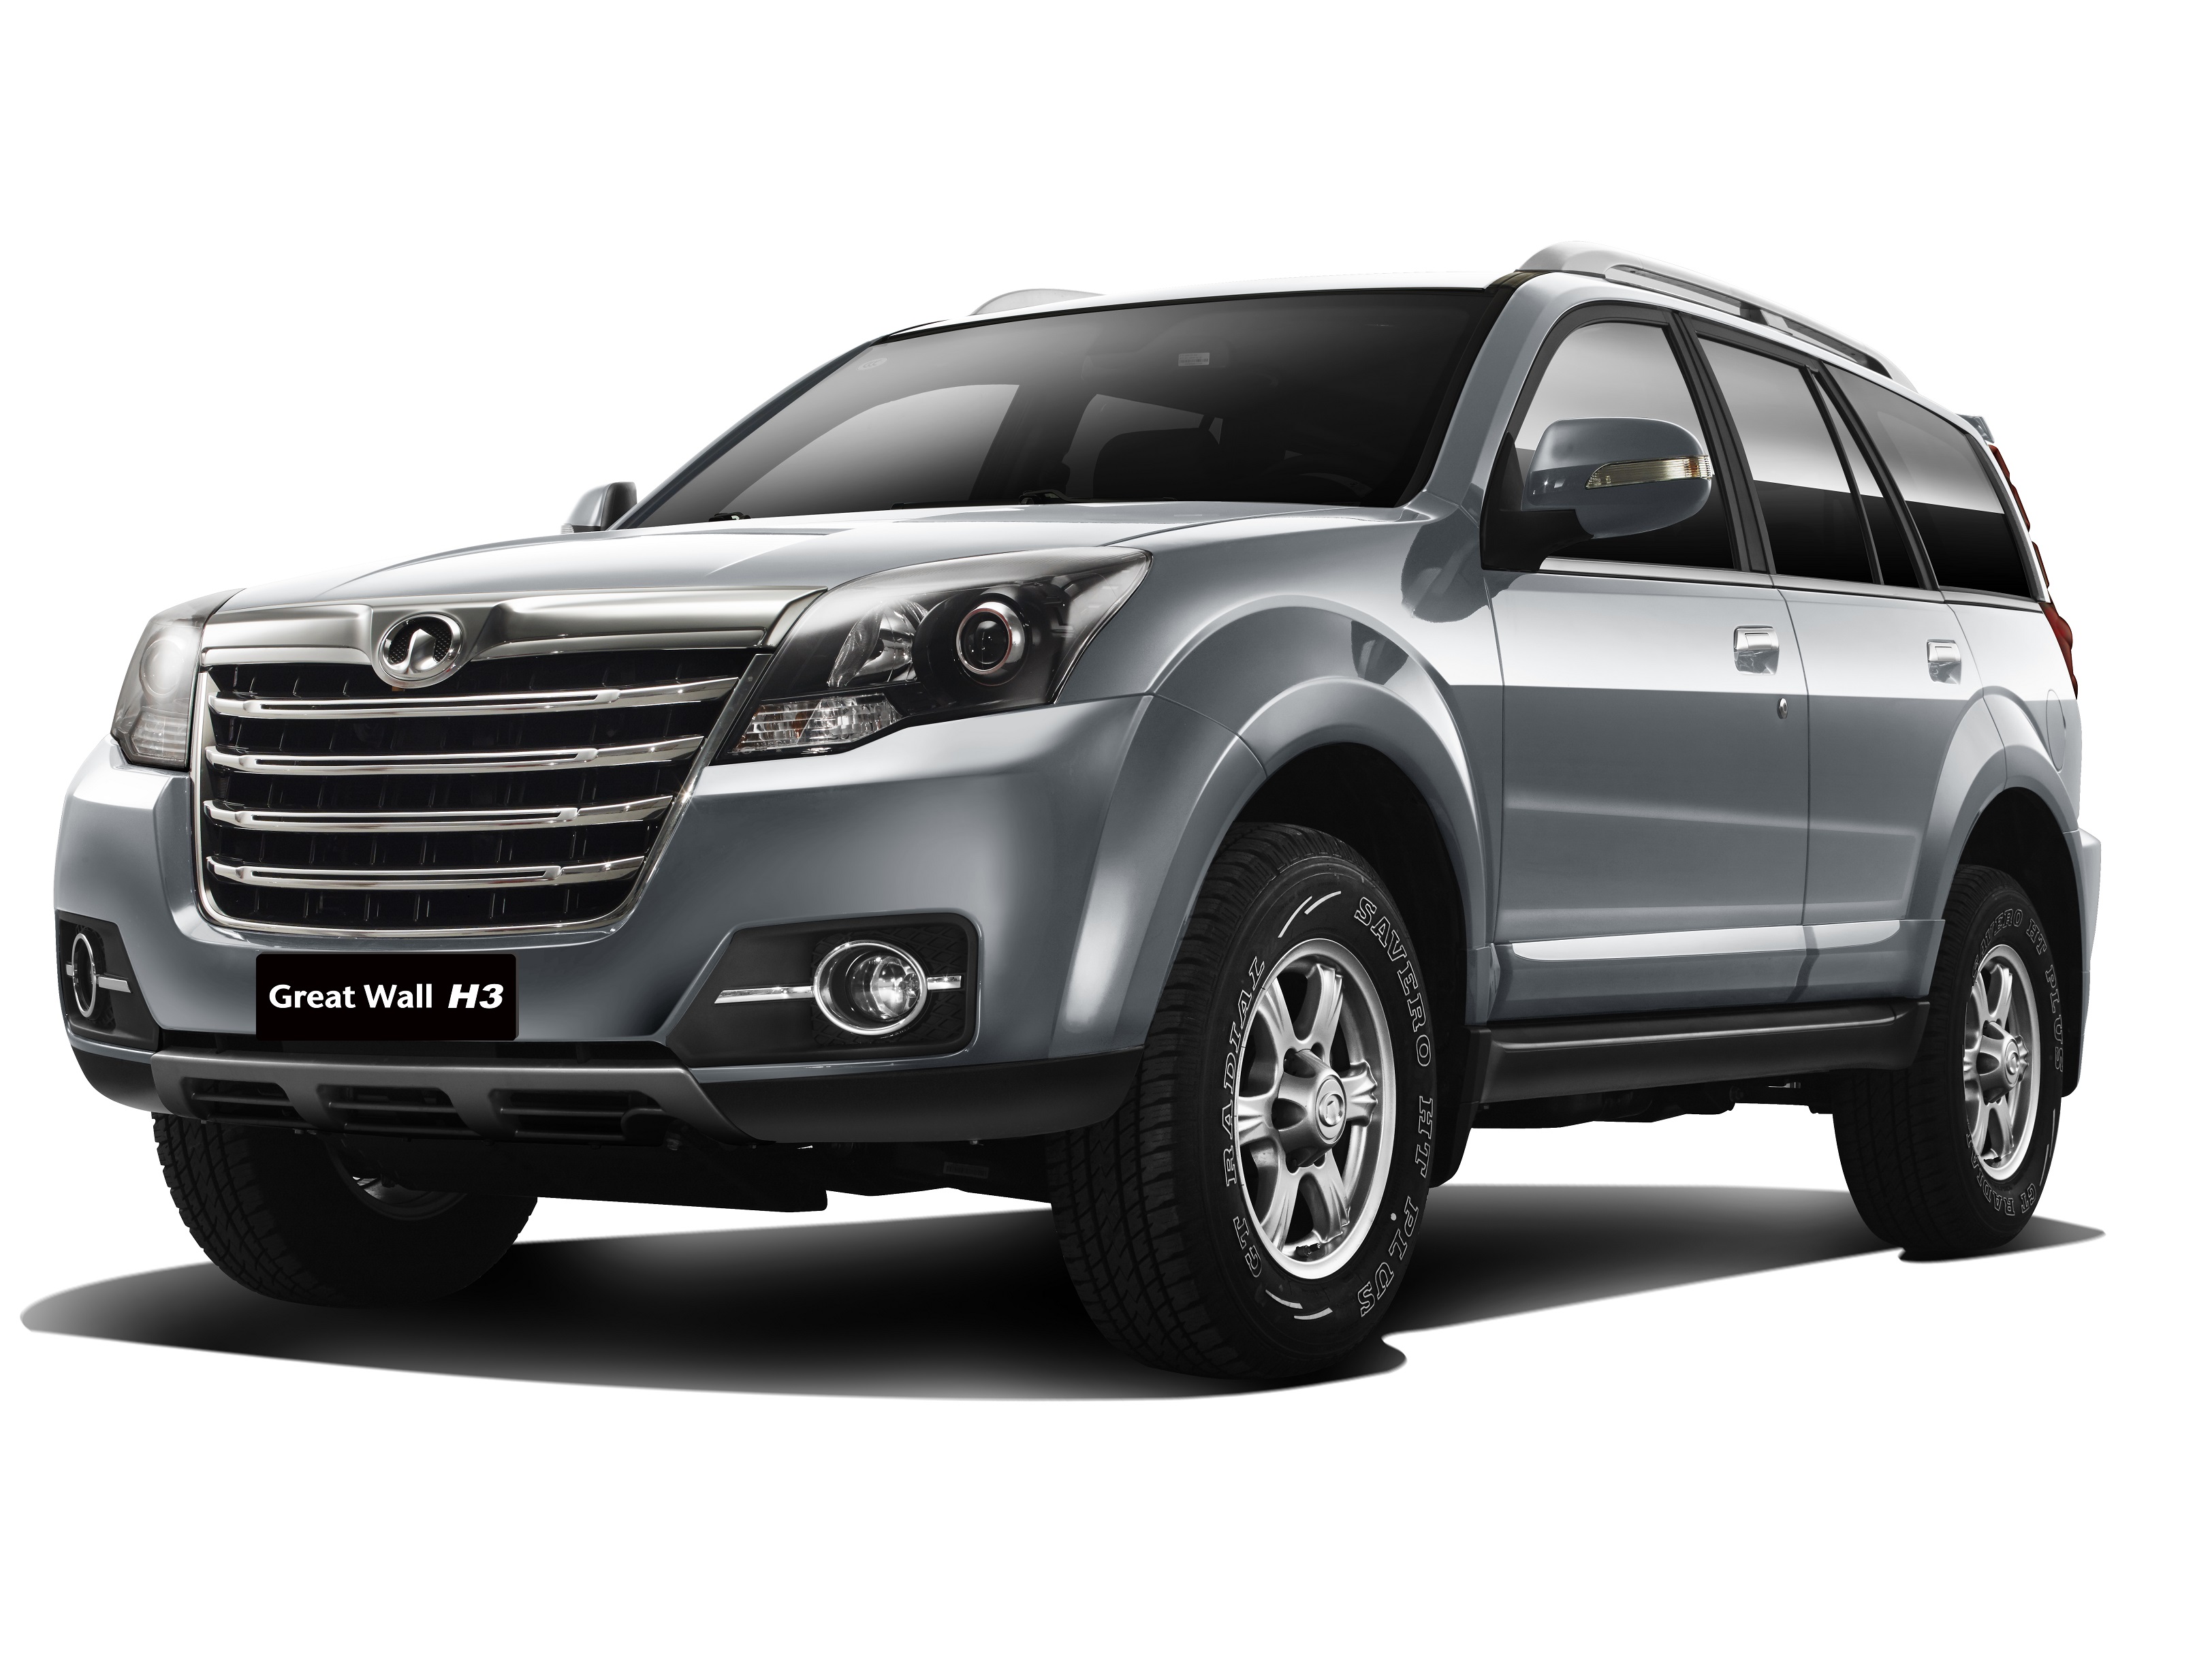 Great Wall Haval H2s suv photo